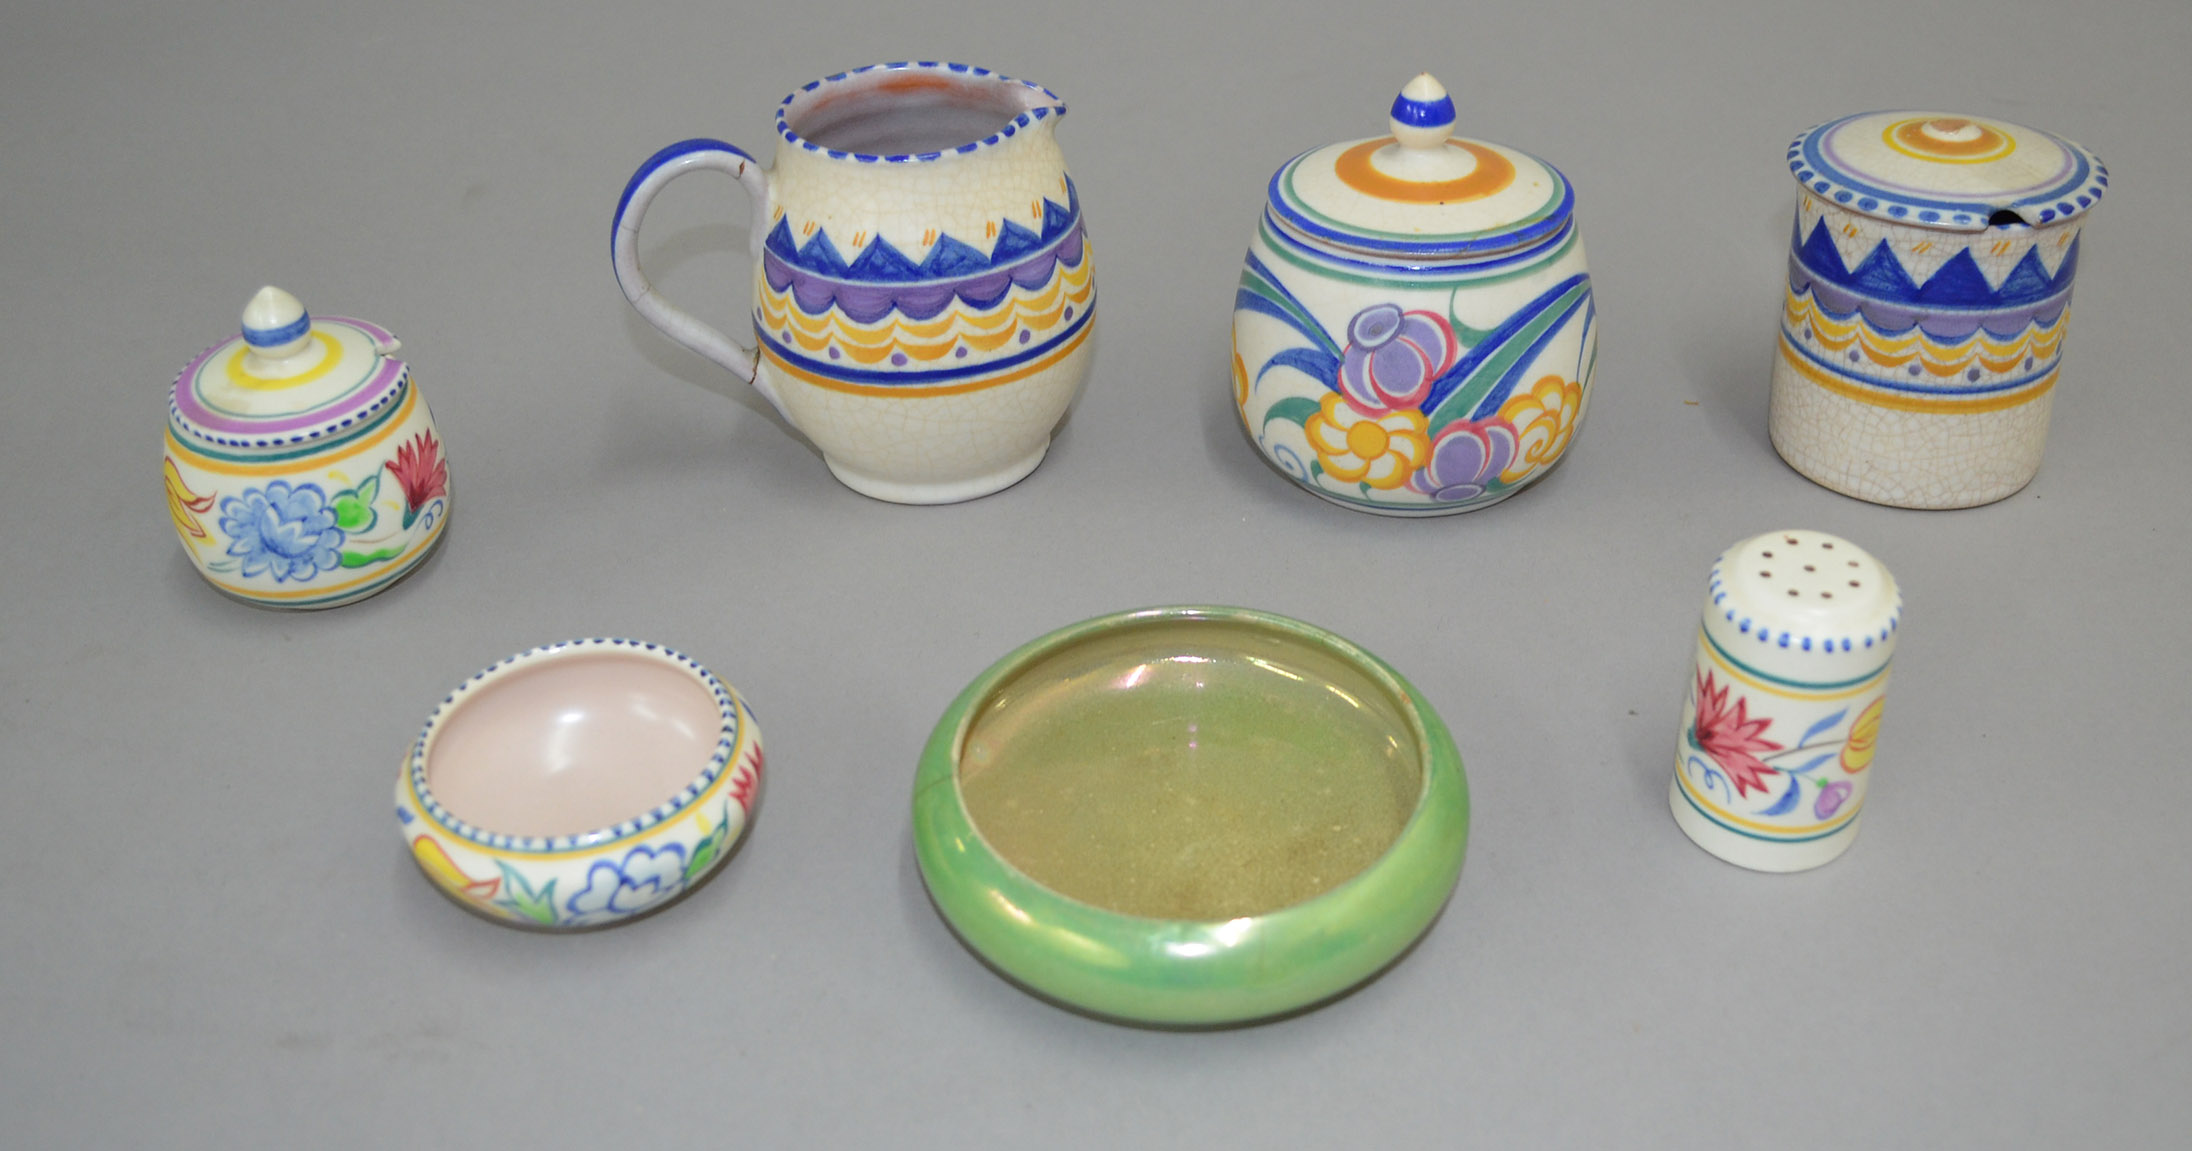 Six items of colourful Poole Pottery, together with an unusual green Moorcroft shallow dish.